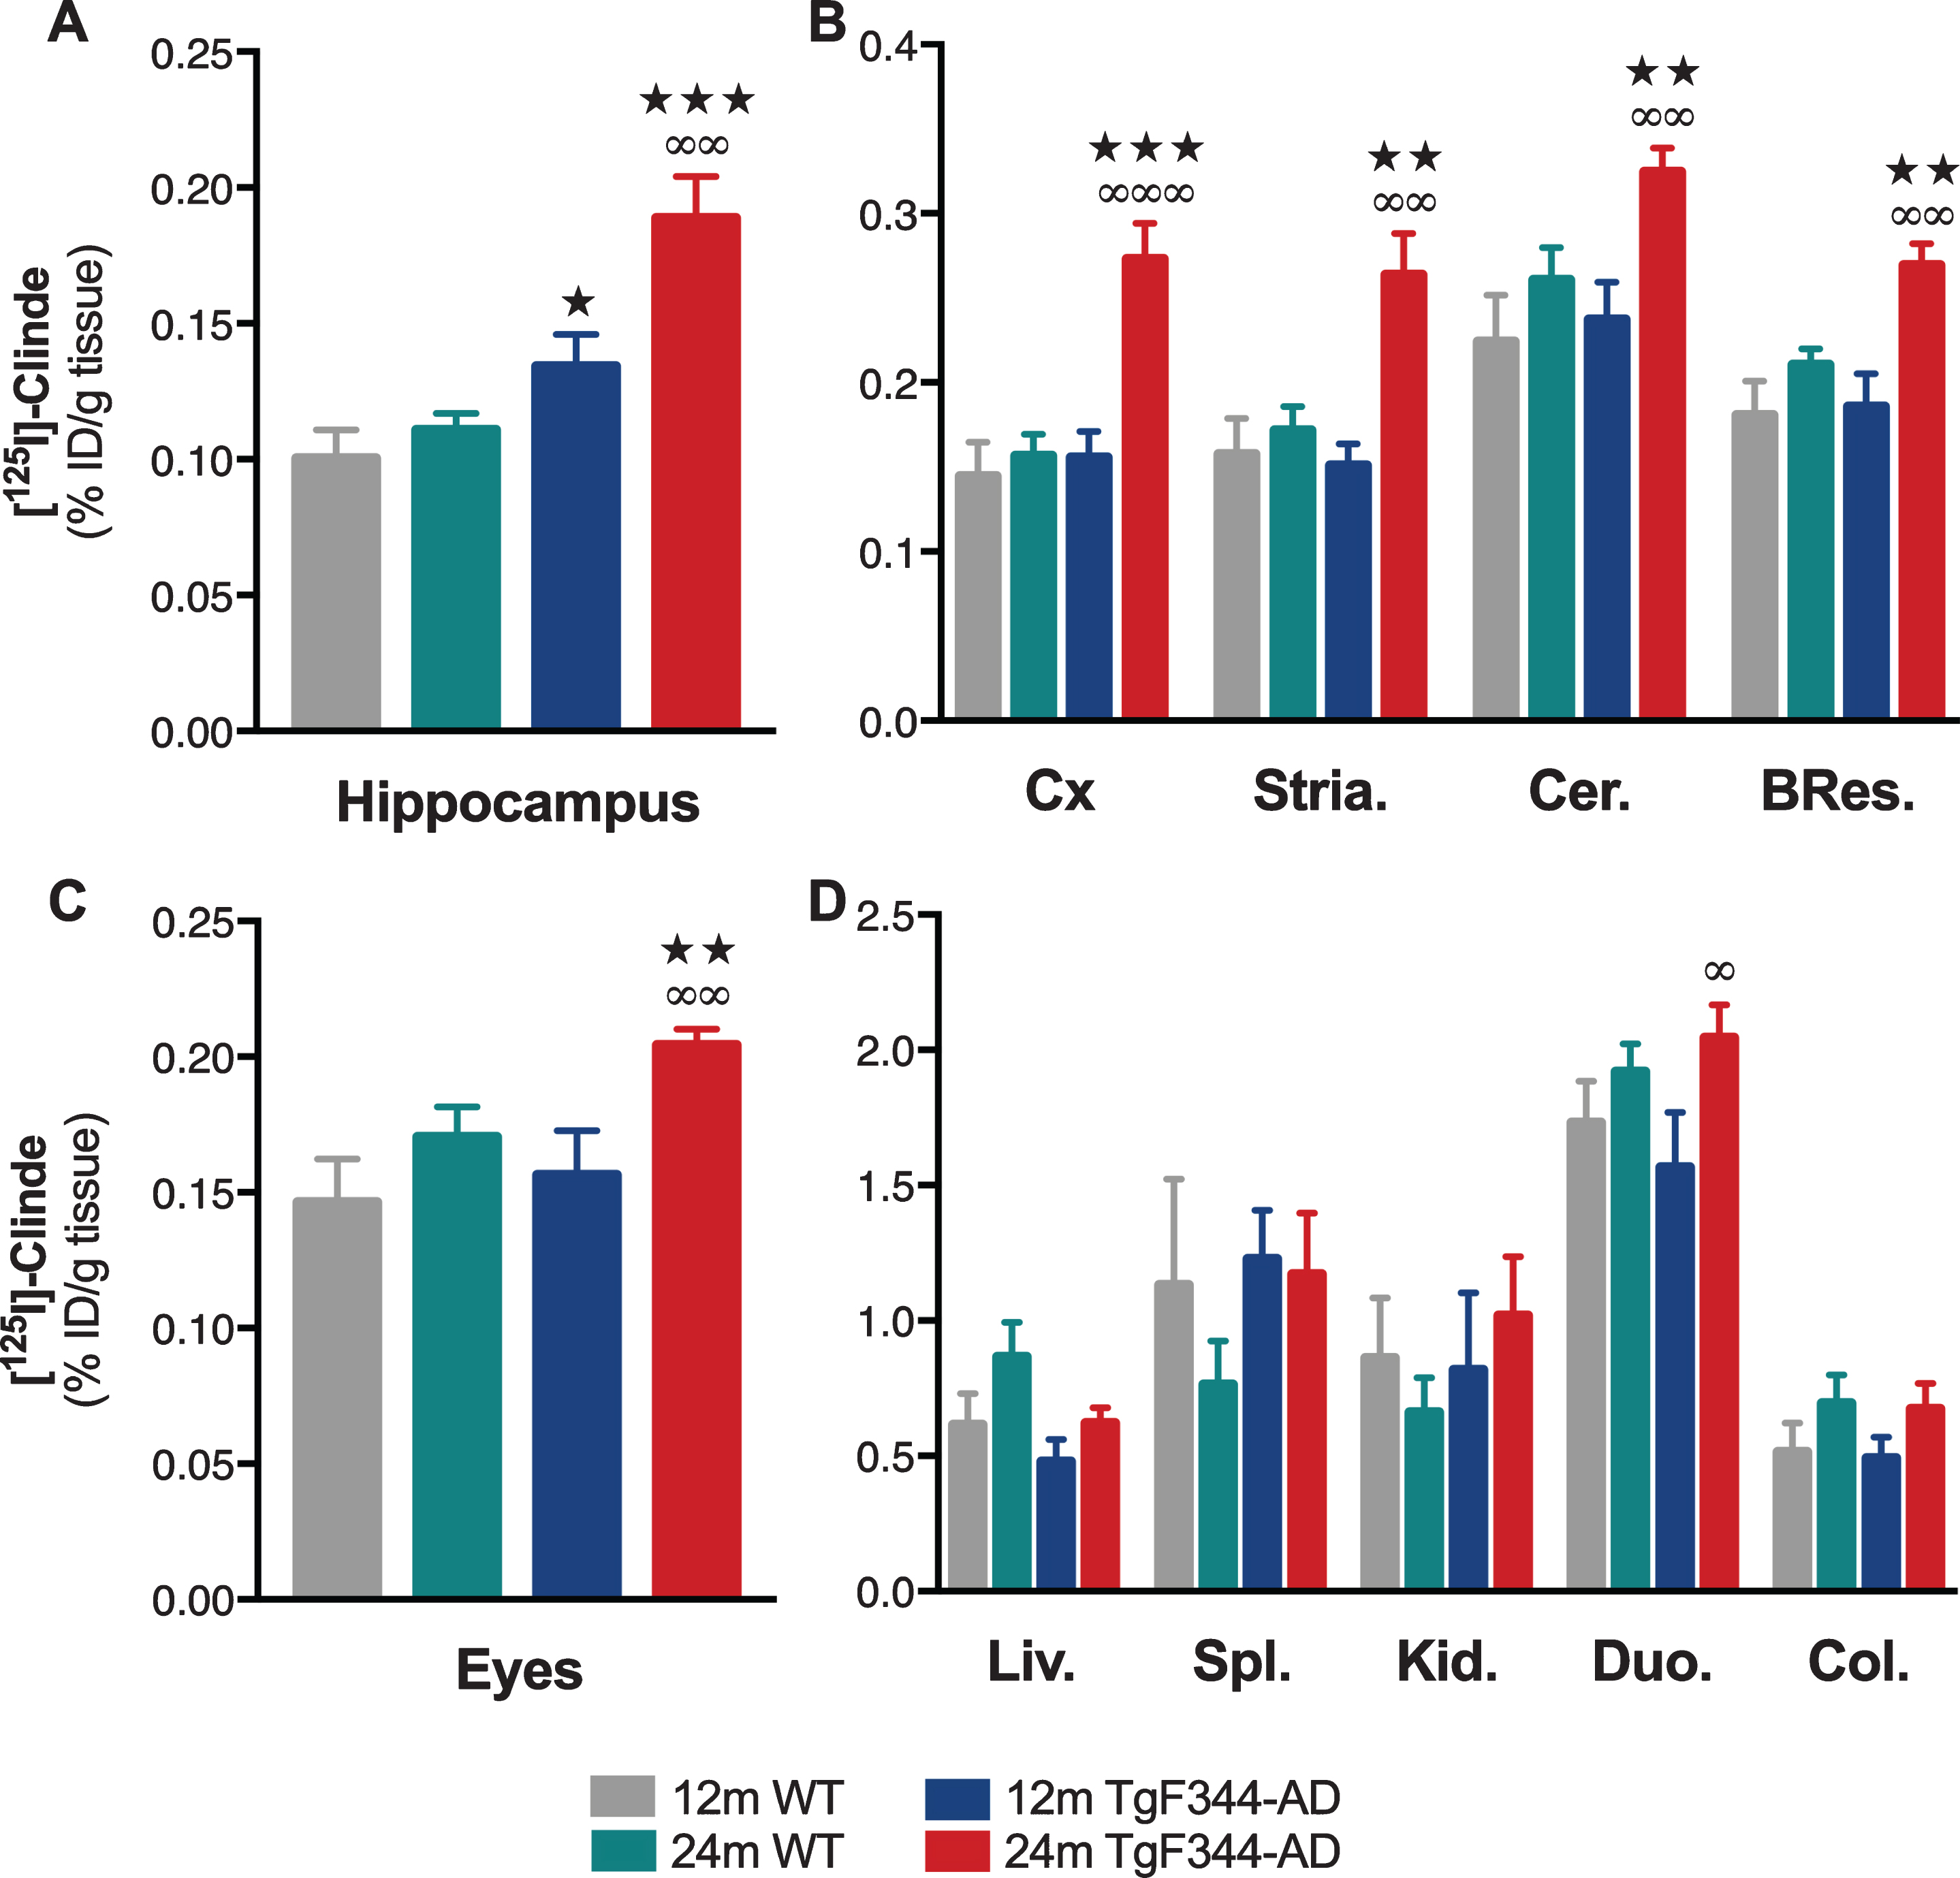 TSPO overexpression in the brain and in peripheral organs in TgF344-AD rats. The ex vivo measures of [125I]CLINDE concentrations (% injected dose -ID-/g of tissue) were performed in the hippocampus (A), in various brain areas (B), in the eyes (C), and in various peripheral organs (D) in wild-type (WT) and TgF344-AD rats at the age of 12 and 24 months. [125I]CLINDE concentrations were analyzed by two-way ANOVA. Post hoc tests indicate genotype differences at the same age (★  ) and age effects in TgF344-AD (∞). The number of symbols indicates the significance level (1: p < 0.05; 2: p < 0.01; 3: p < 0.001). Mean±SEM of 8 animals per genotype and per age are presented. BRes., brain residue; Cer., cerebellum; Col., colon; Cx, frontal cortex; Duo., proximal duodenum; Kid., kidney; Liv., liver; Spl., spleen; Stria., striatum.